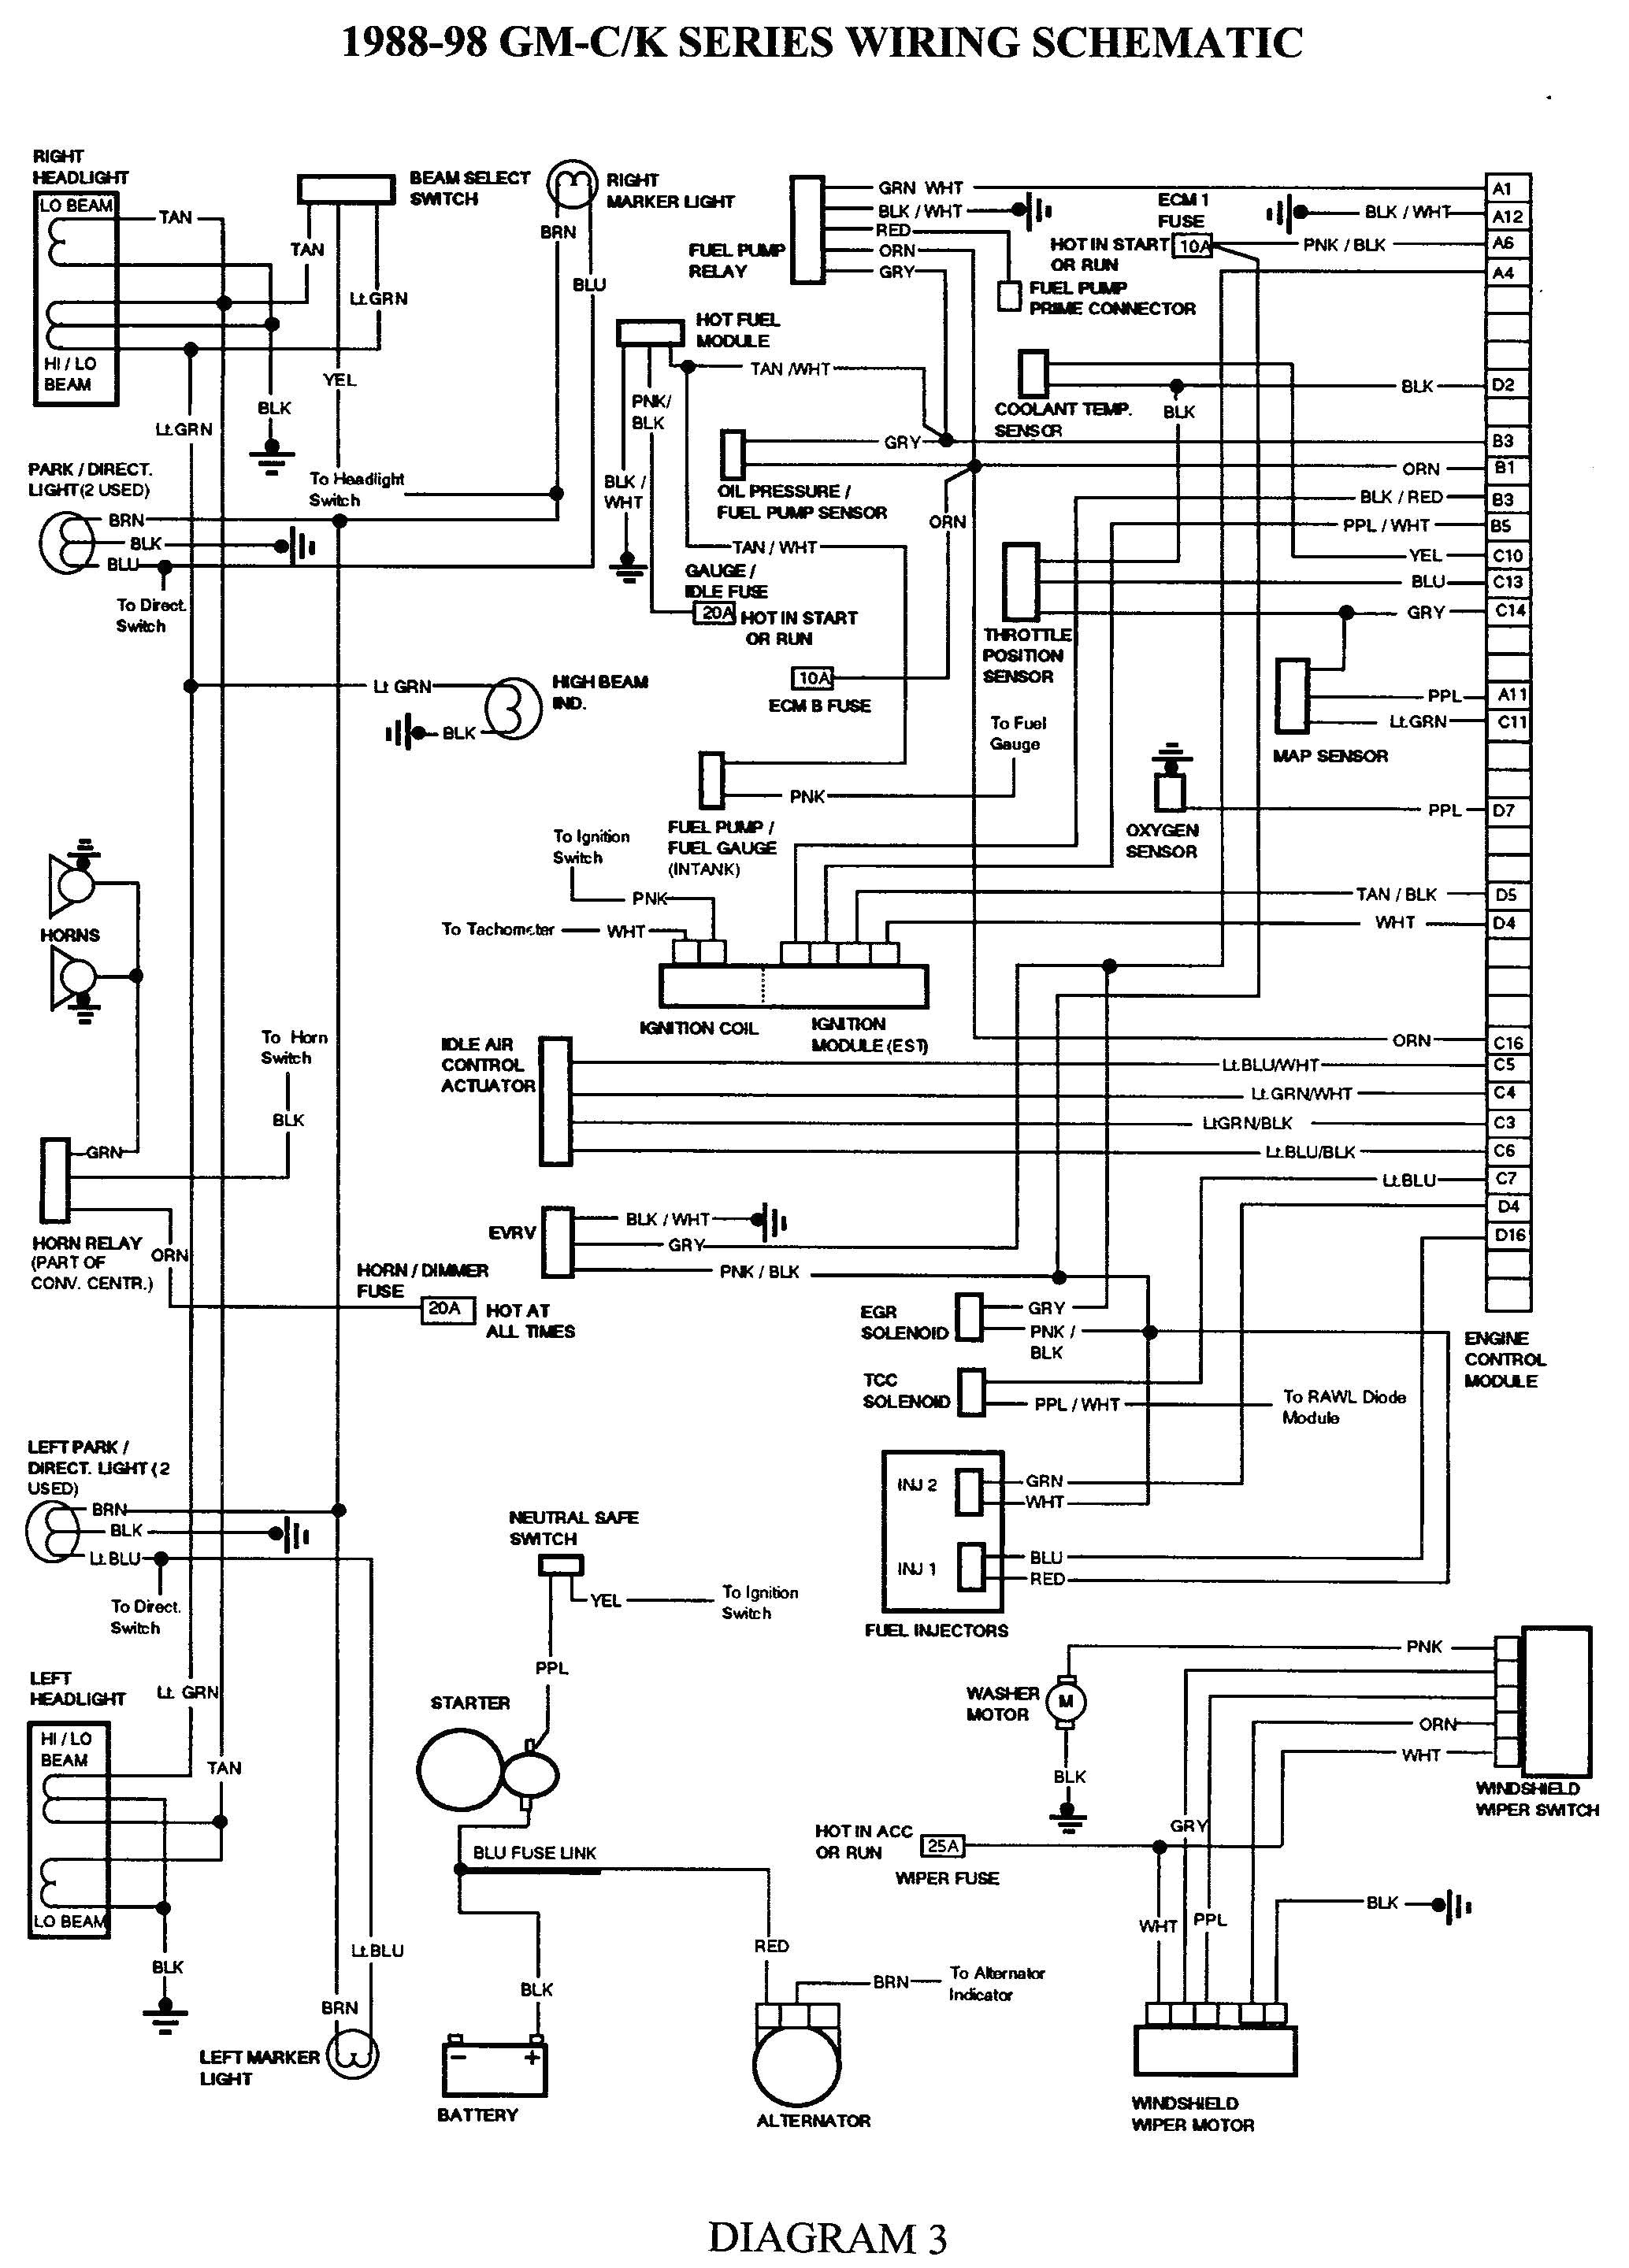 chevy 350 tbi wiring harness diagram moreover 2002 chevy s10 wiring gmc truck wiring diagrams on